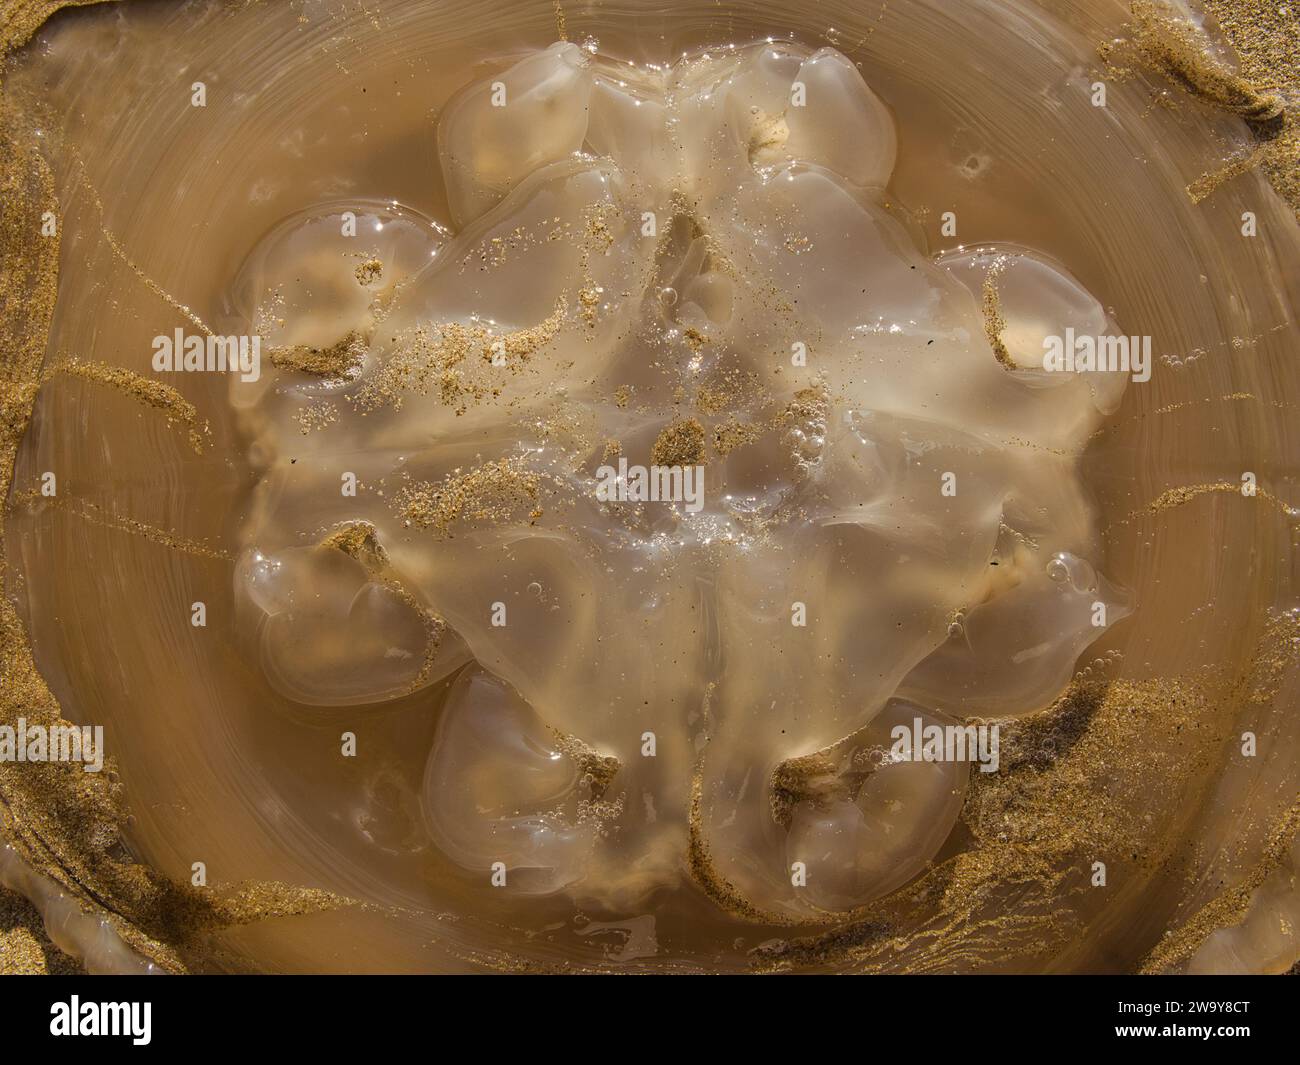 Transparent and gelatinous jellyfish dead on the beach sand. Stock Photo